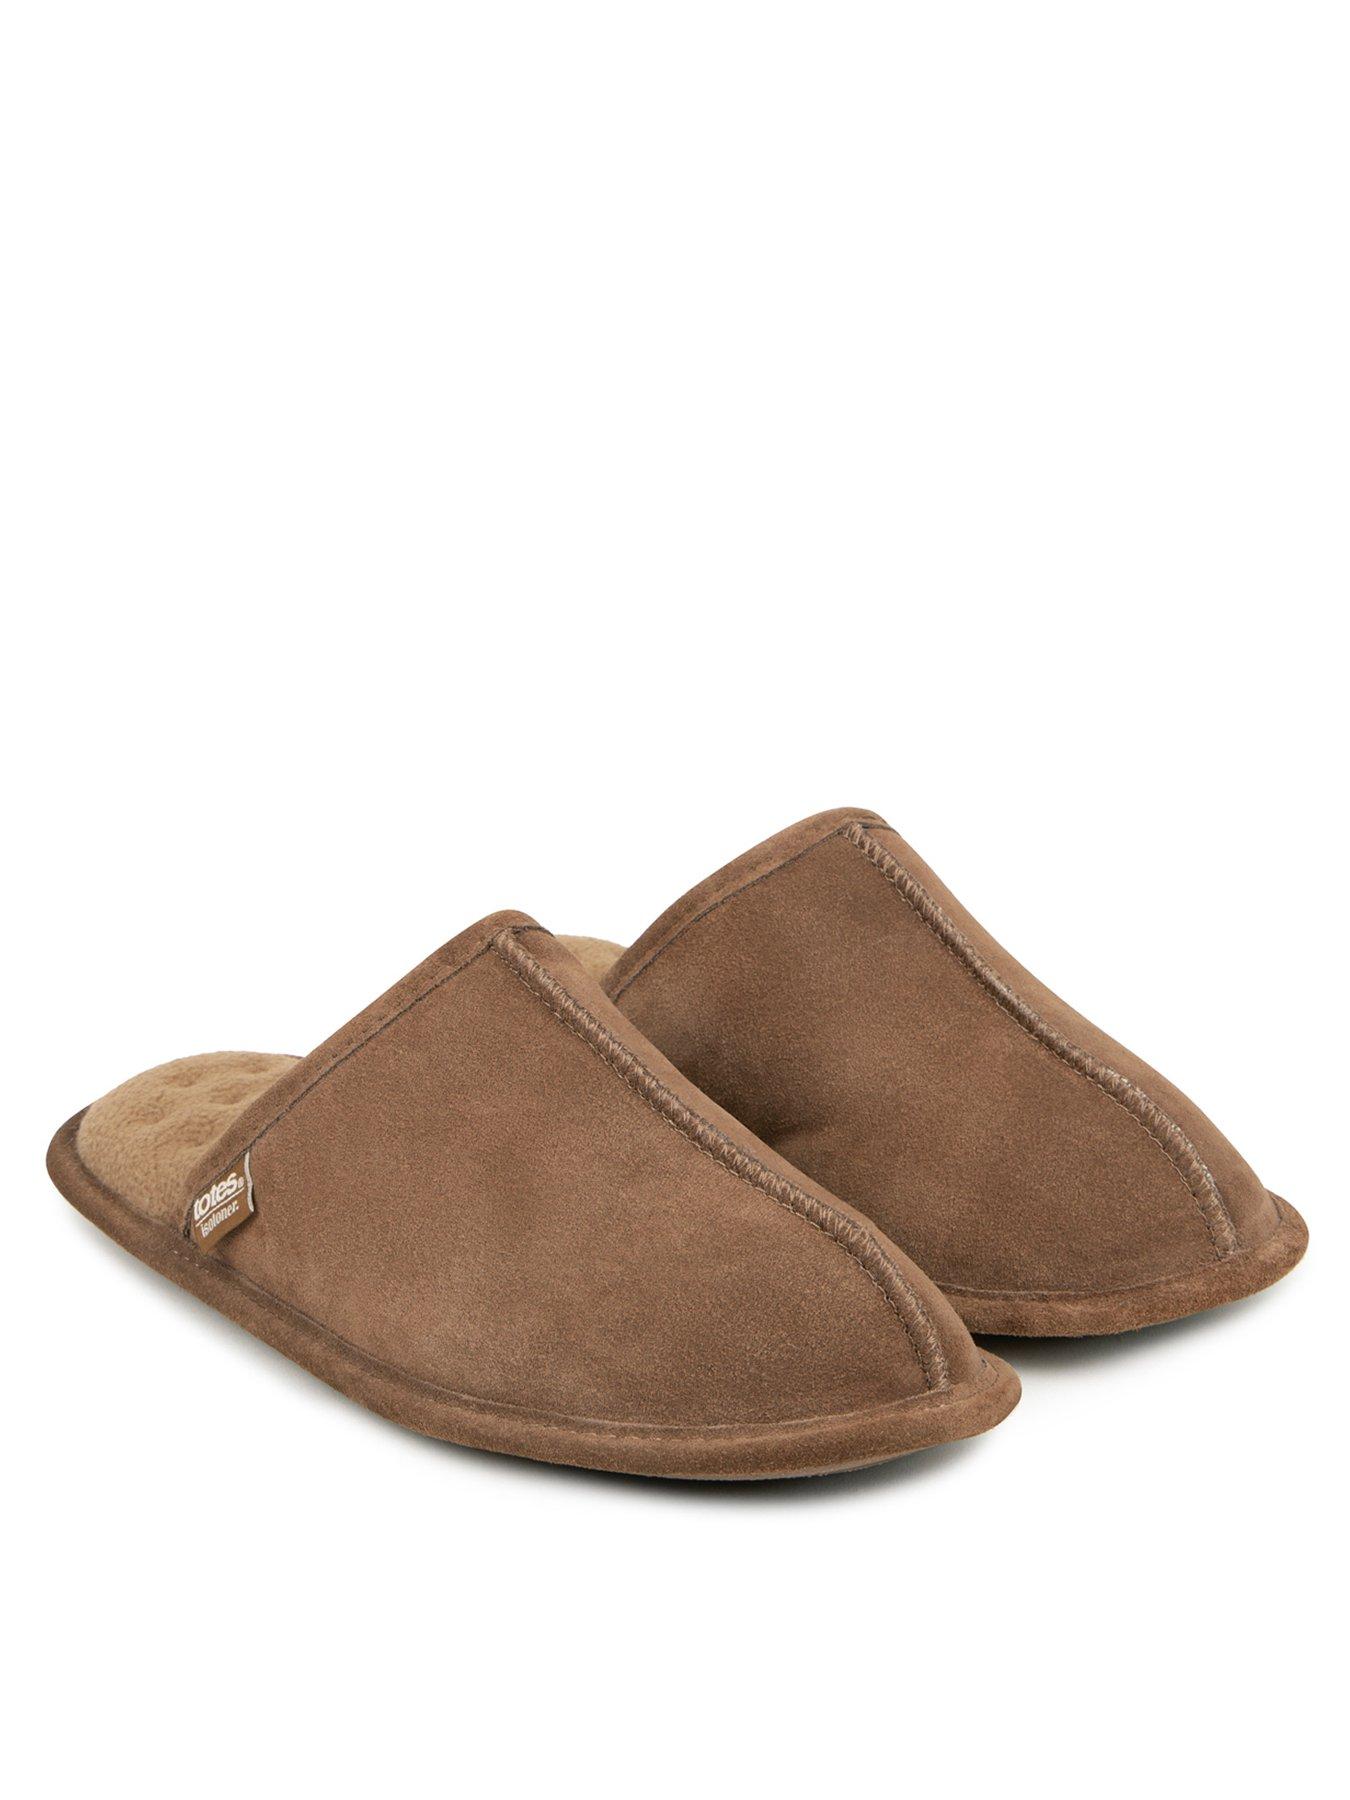 Totes Slippers | Shoes & boots | Men www.very.co.uk